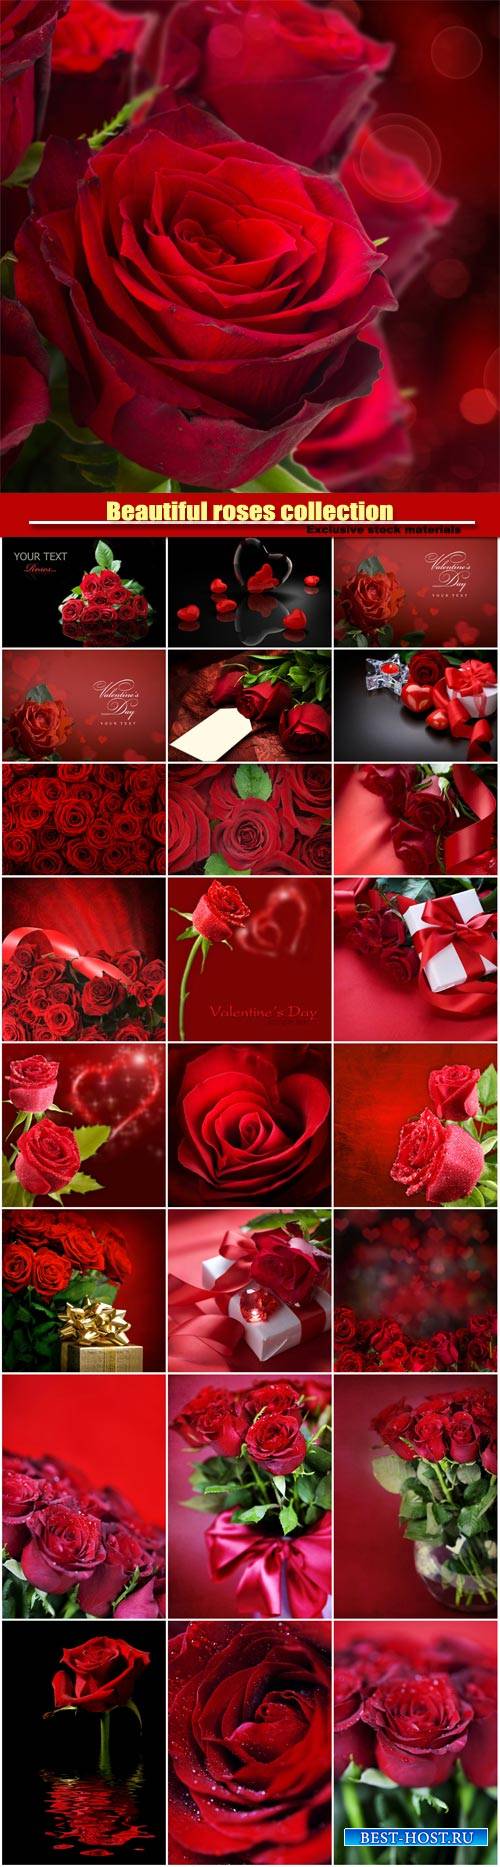 Beautiful roses, romantic collection backgrounds